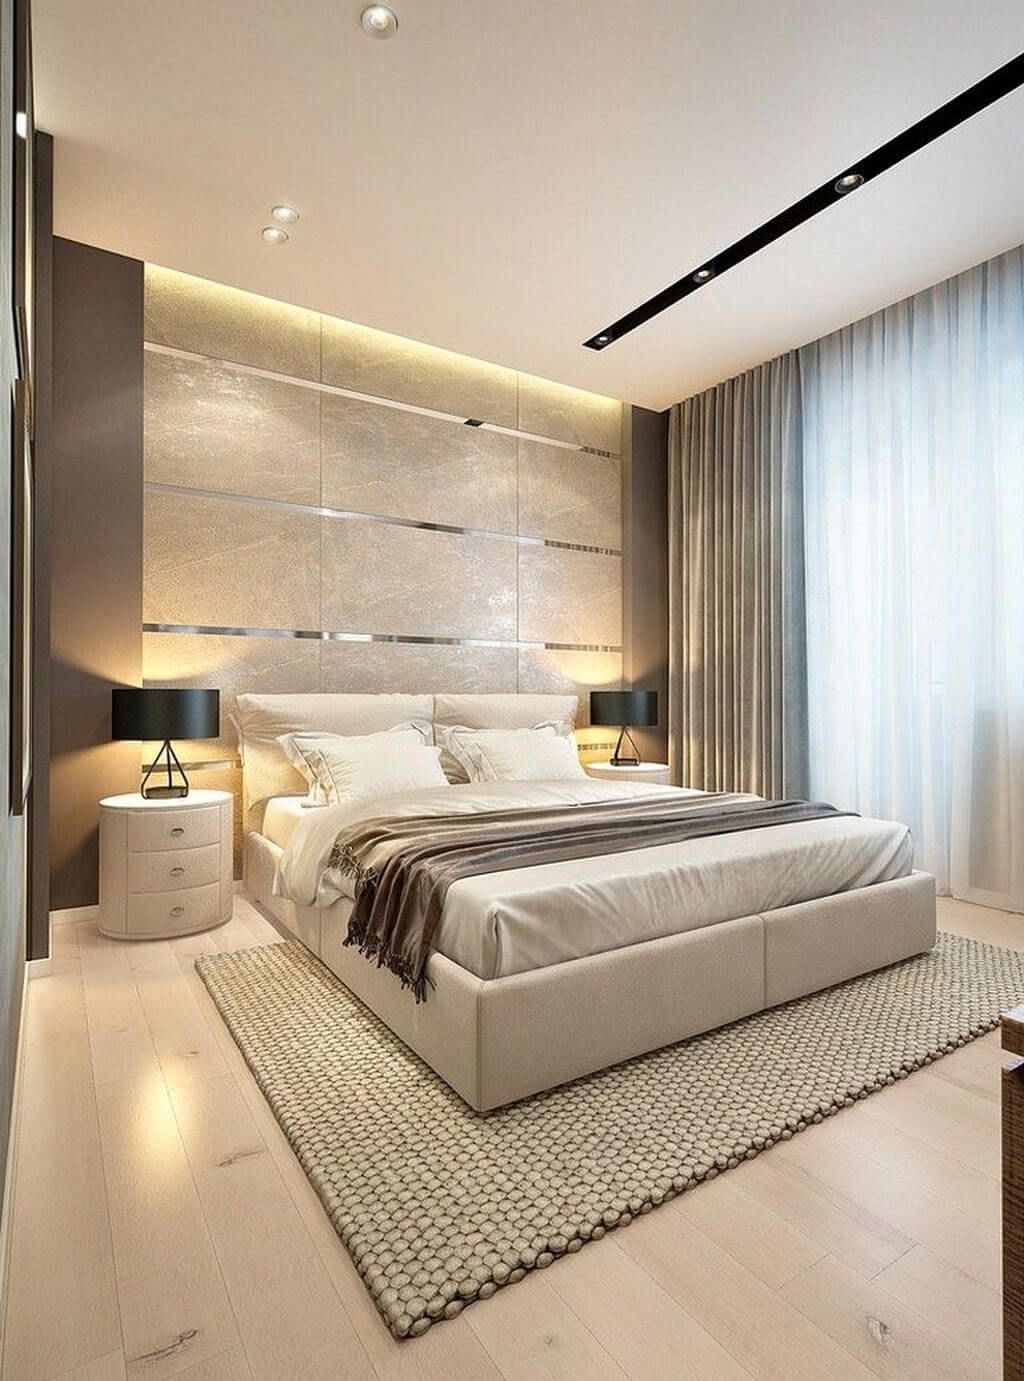 Modern Bedroom Decor Ideas: Transform Your Space With Fresh Ideas